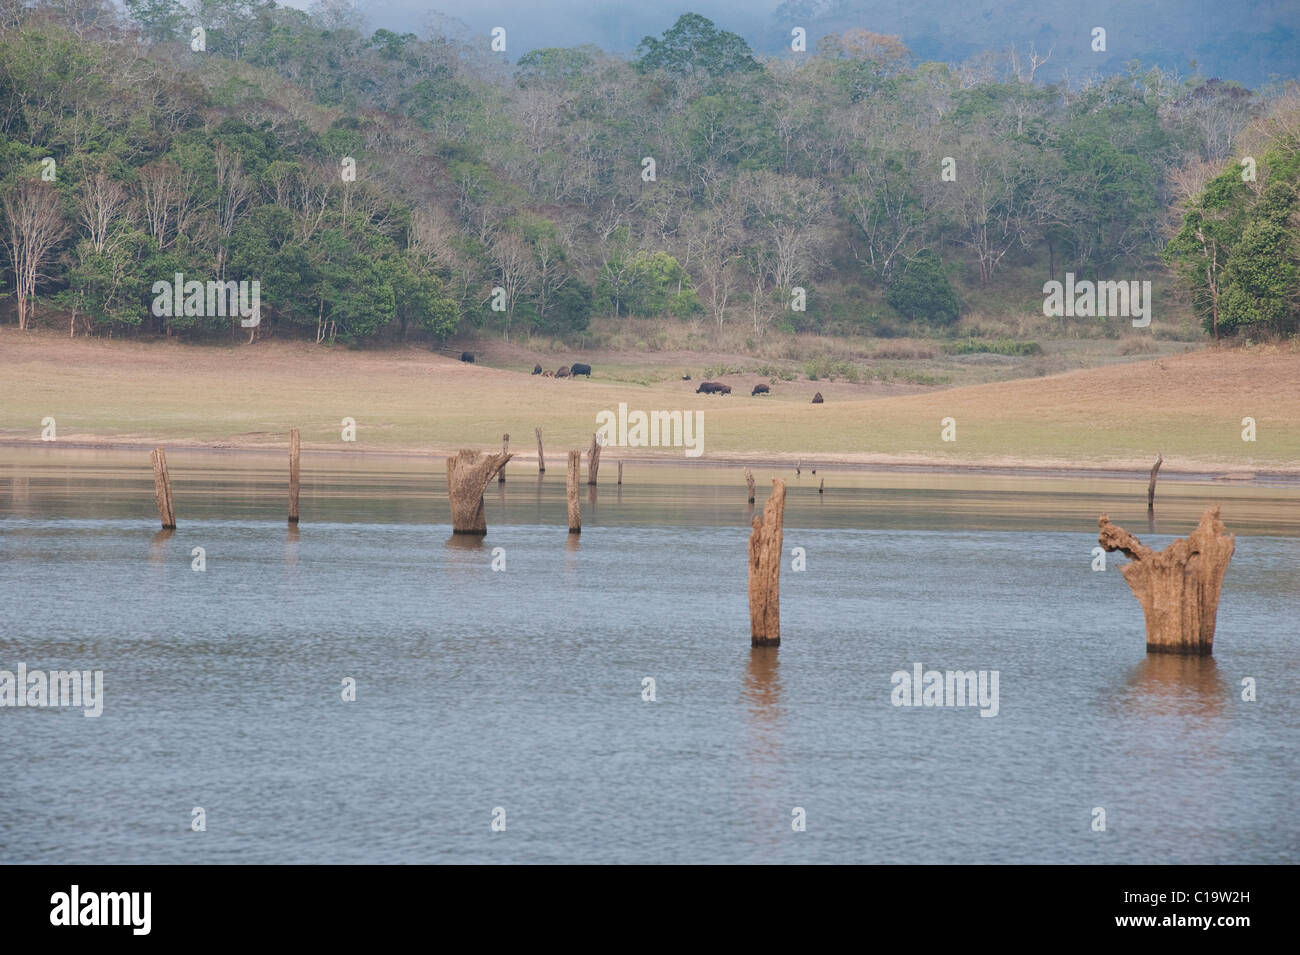 Dead trees in a lake with animals in the background, Thekkady Lake, Thekkady, Periyar National Park, Kerala, India Stock Photo